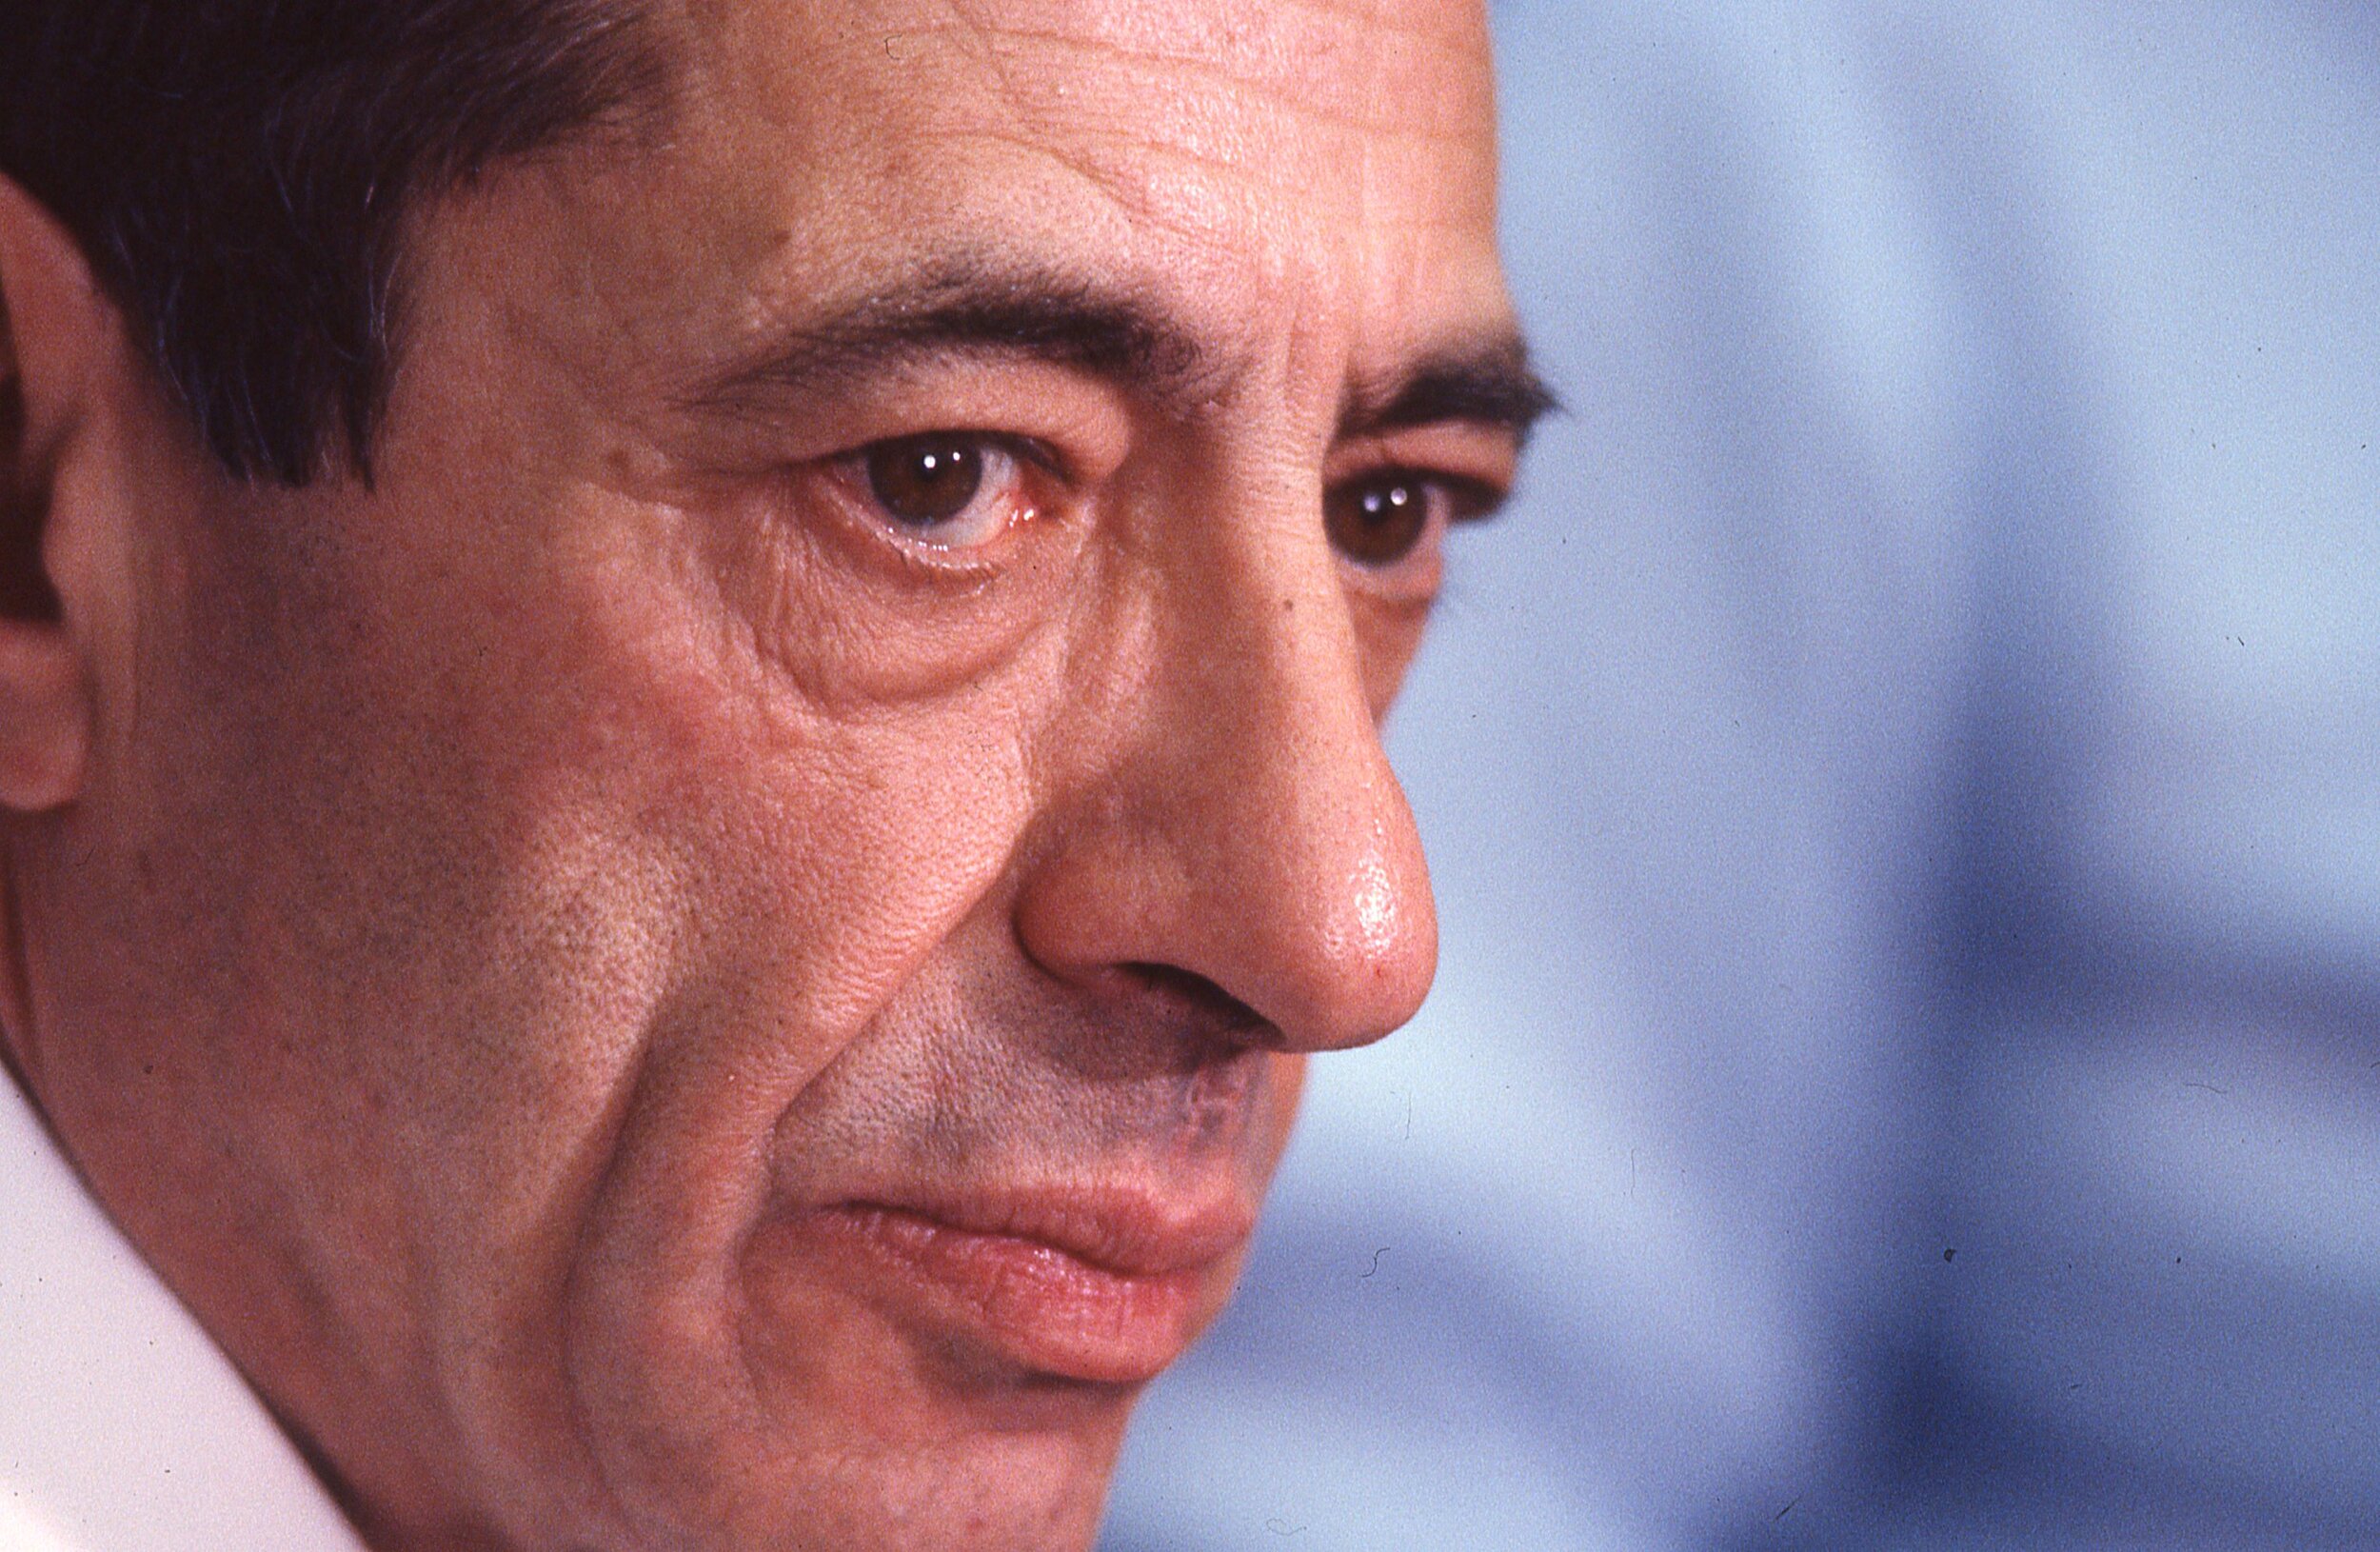 "Mario Cuomo Here" by Philip Gourevitch